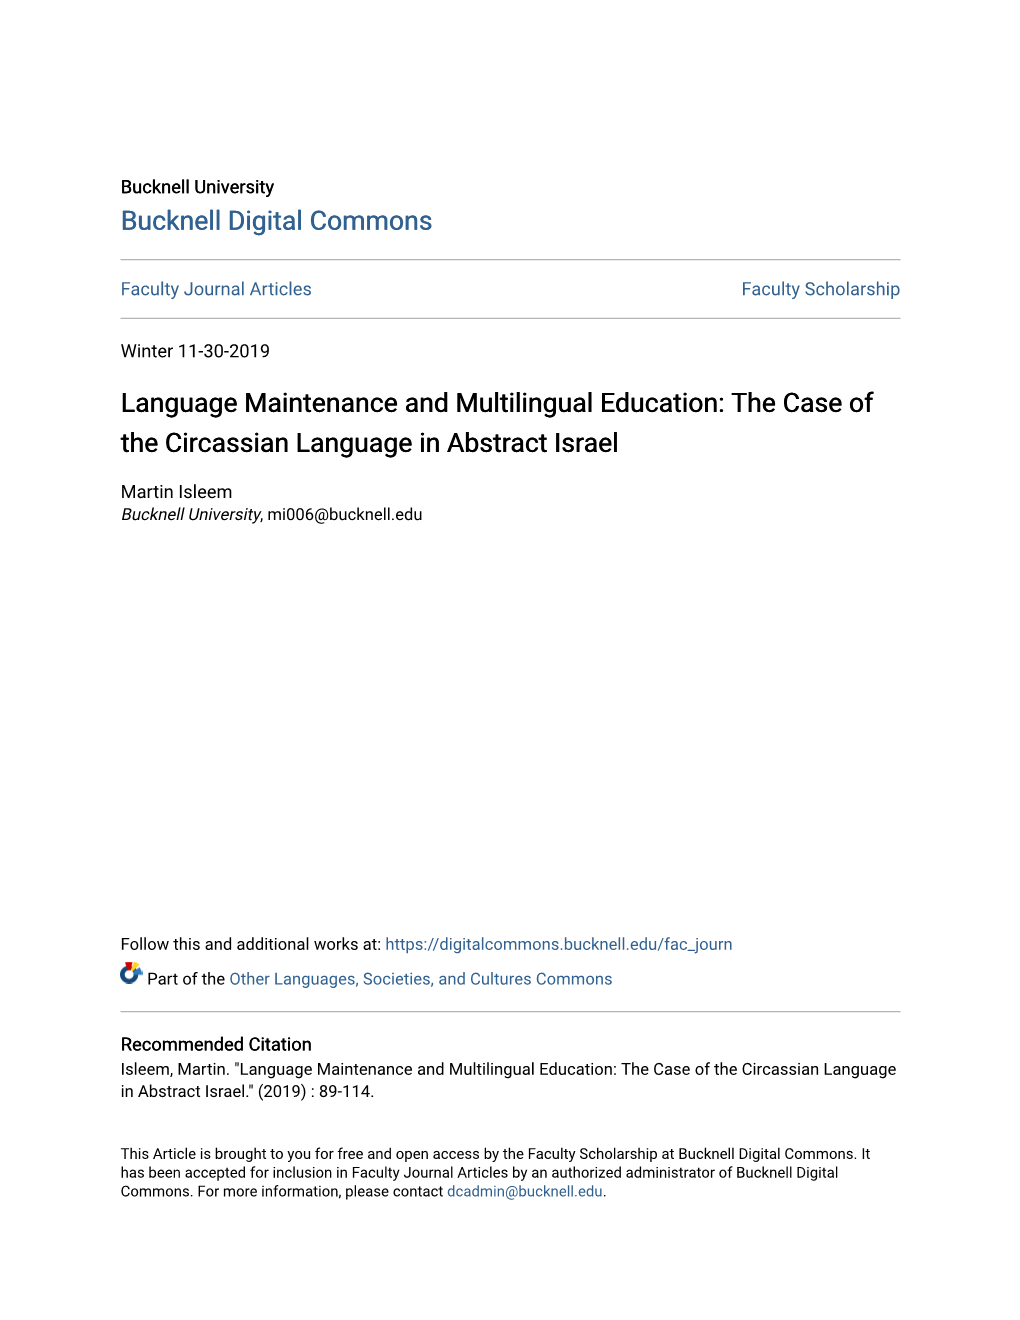 Language Maintenance and Multilingual Education: the Case of the Circassian Language in Abstract Israel